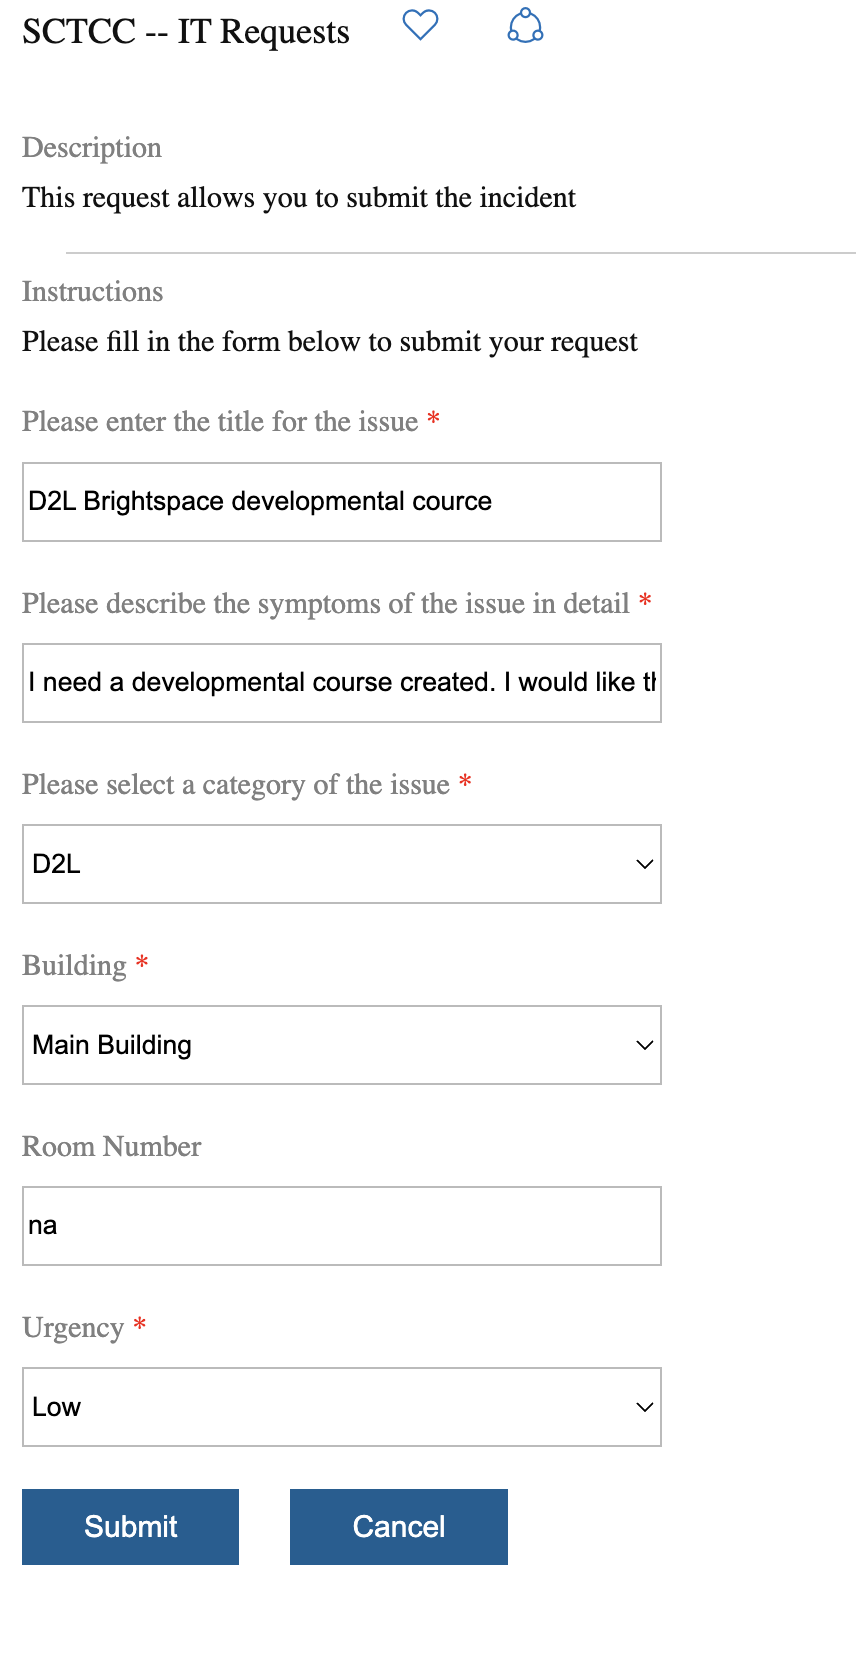 screenshot of filling out IT request form